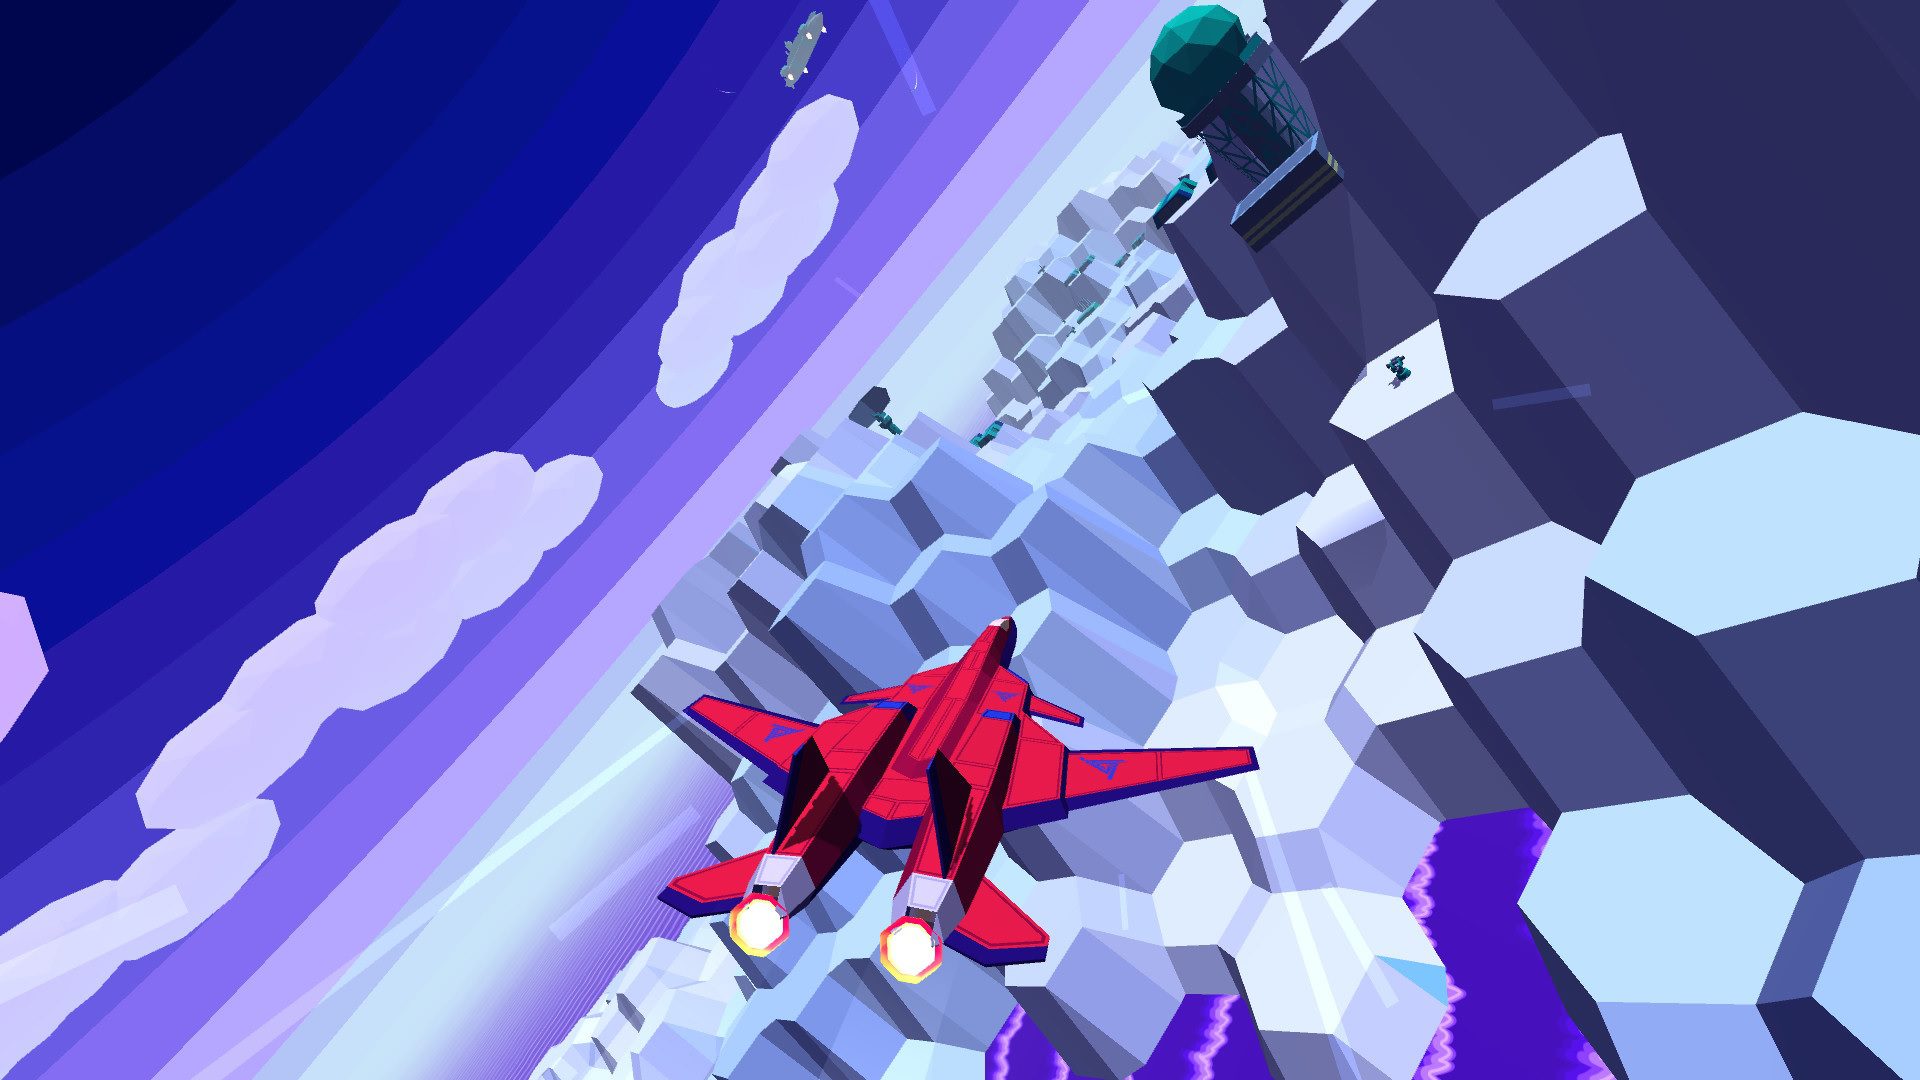 Sky Rogue now available on Windows 10 and Xbox One